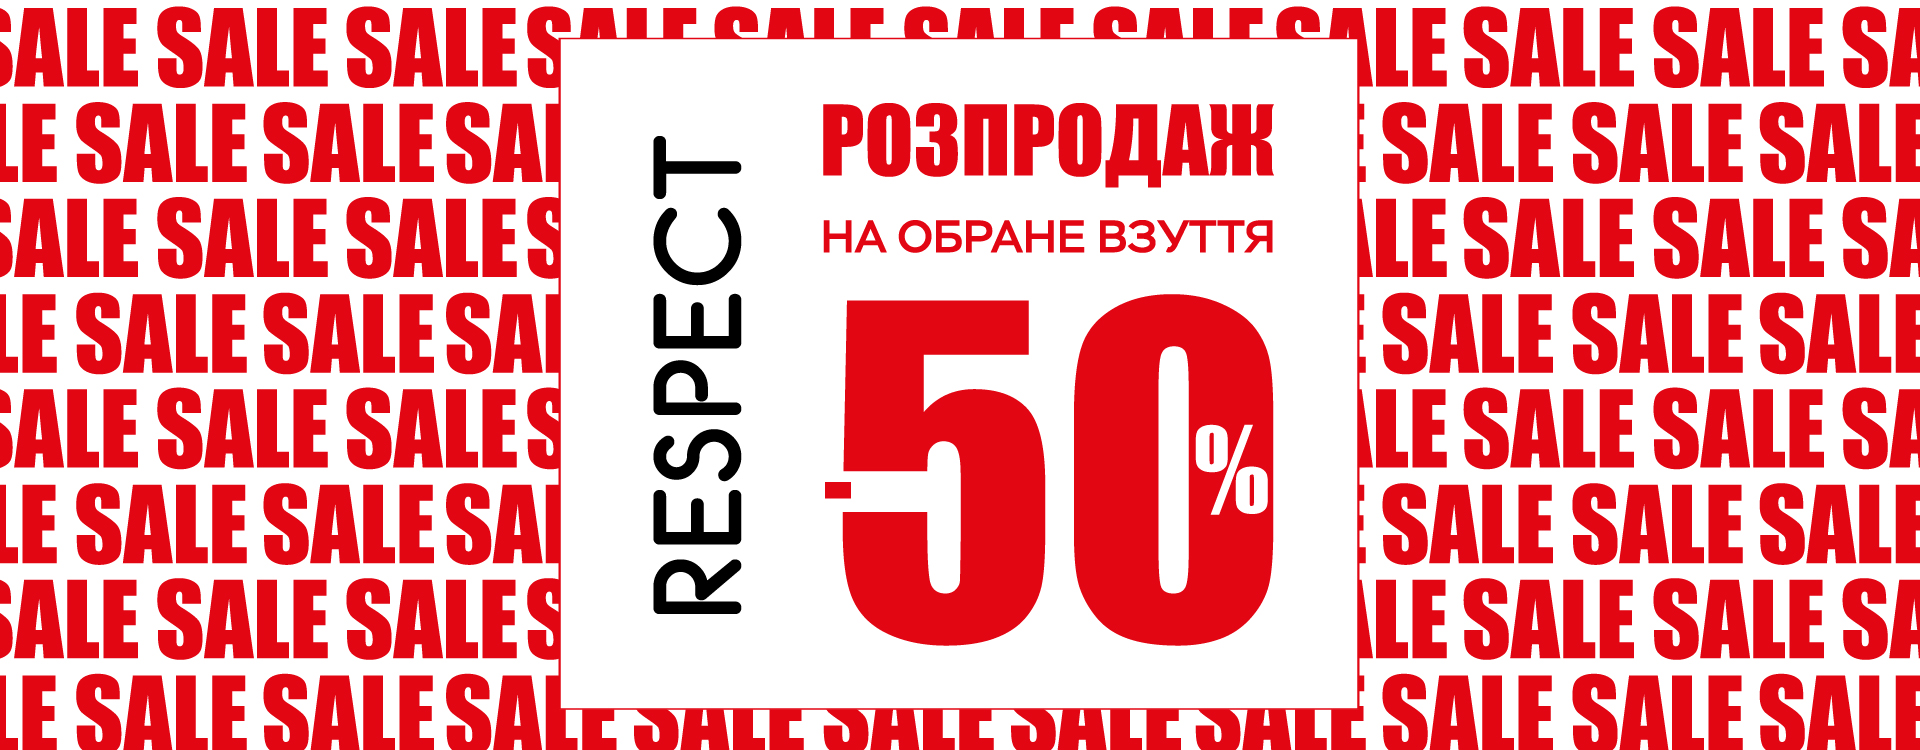 -50% on all seasonal shoes in Respect